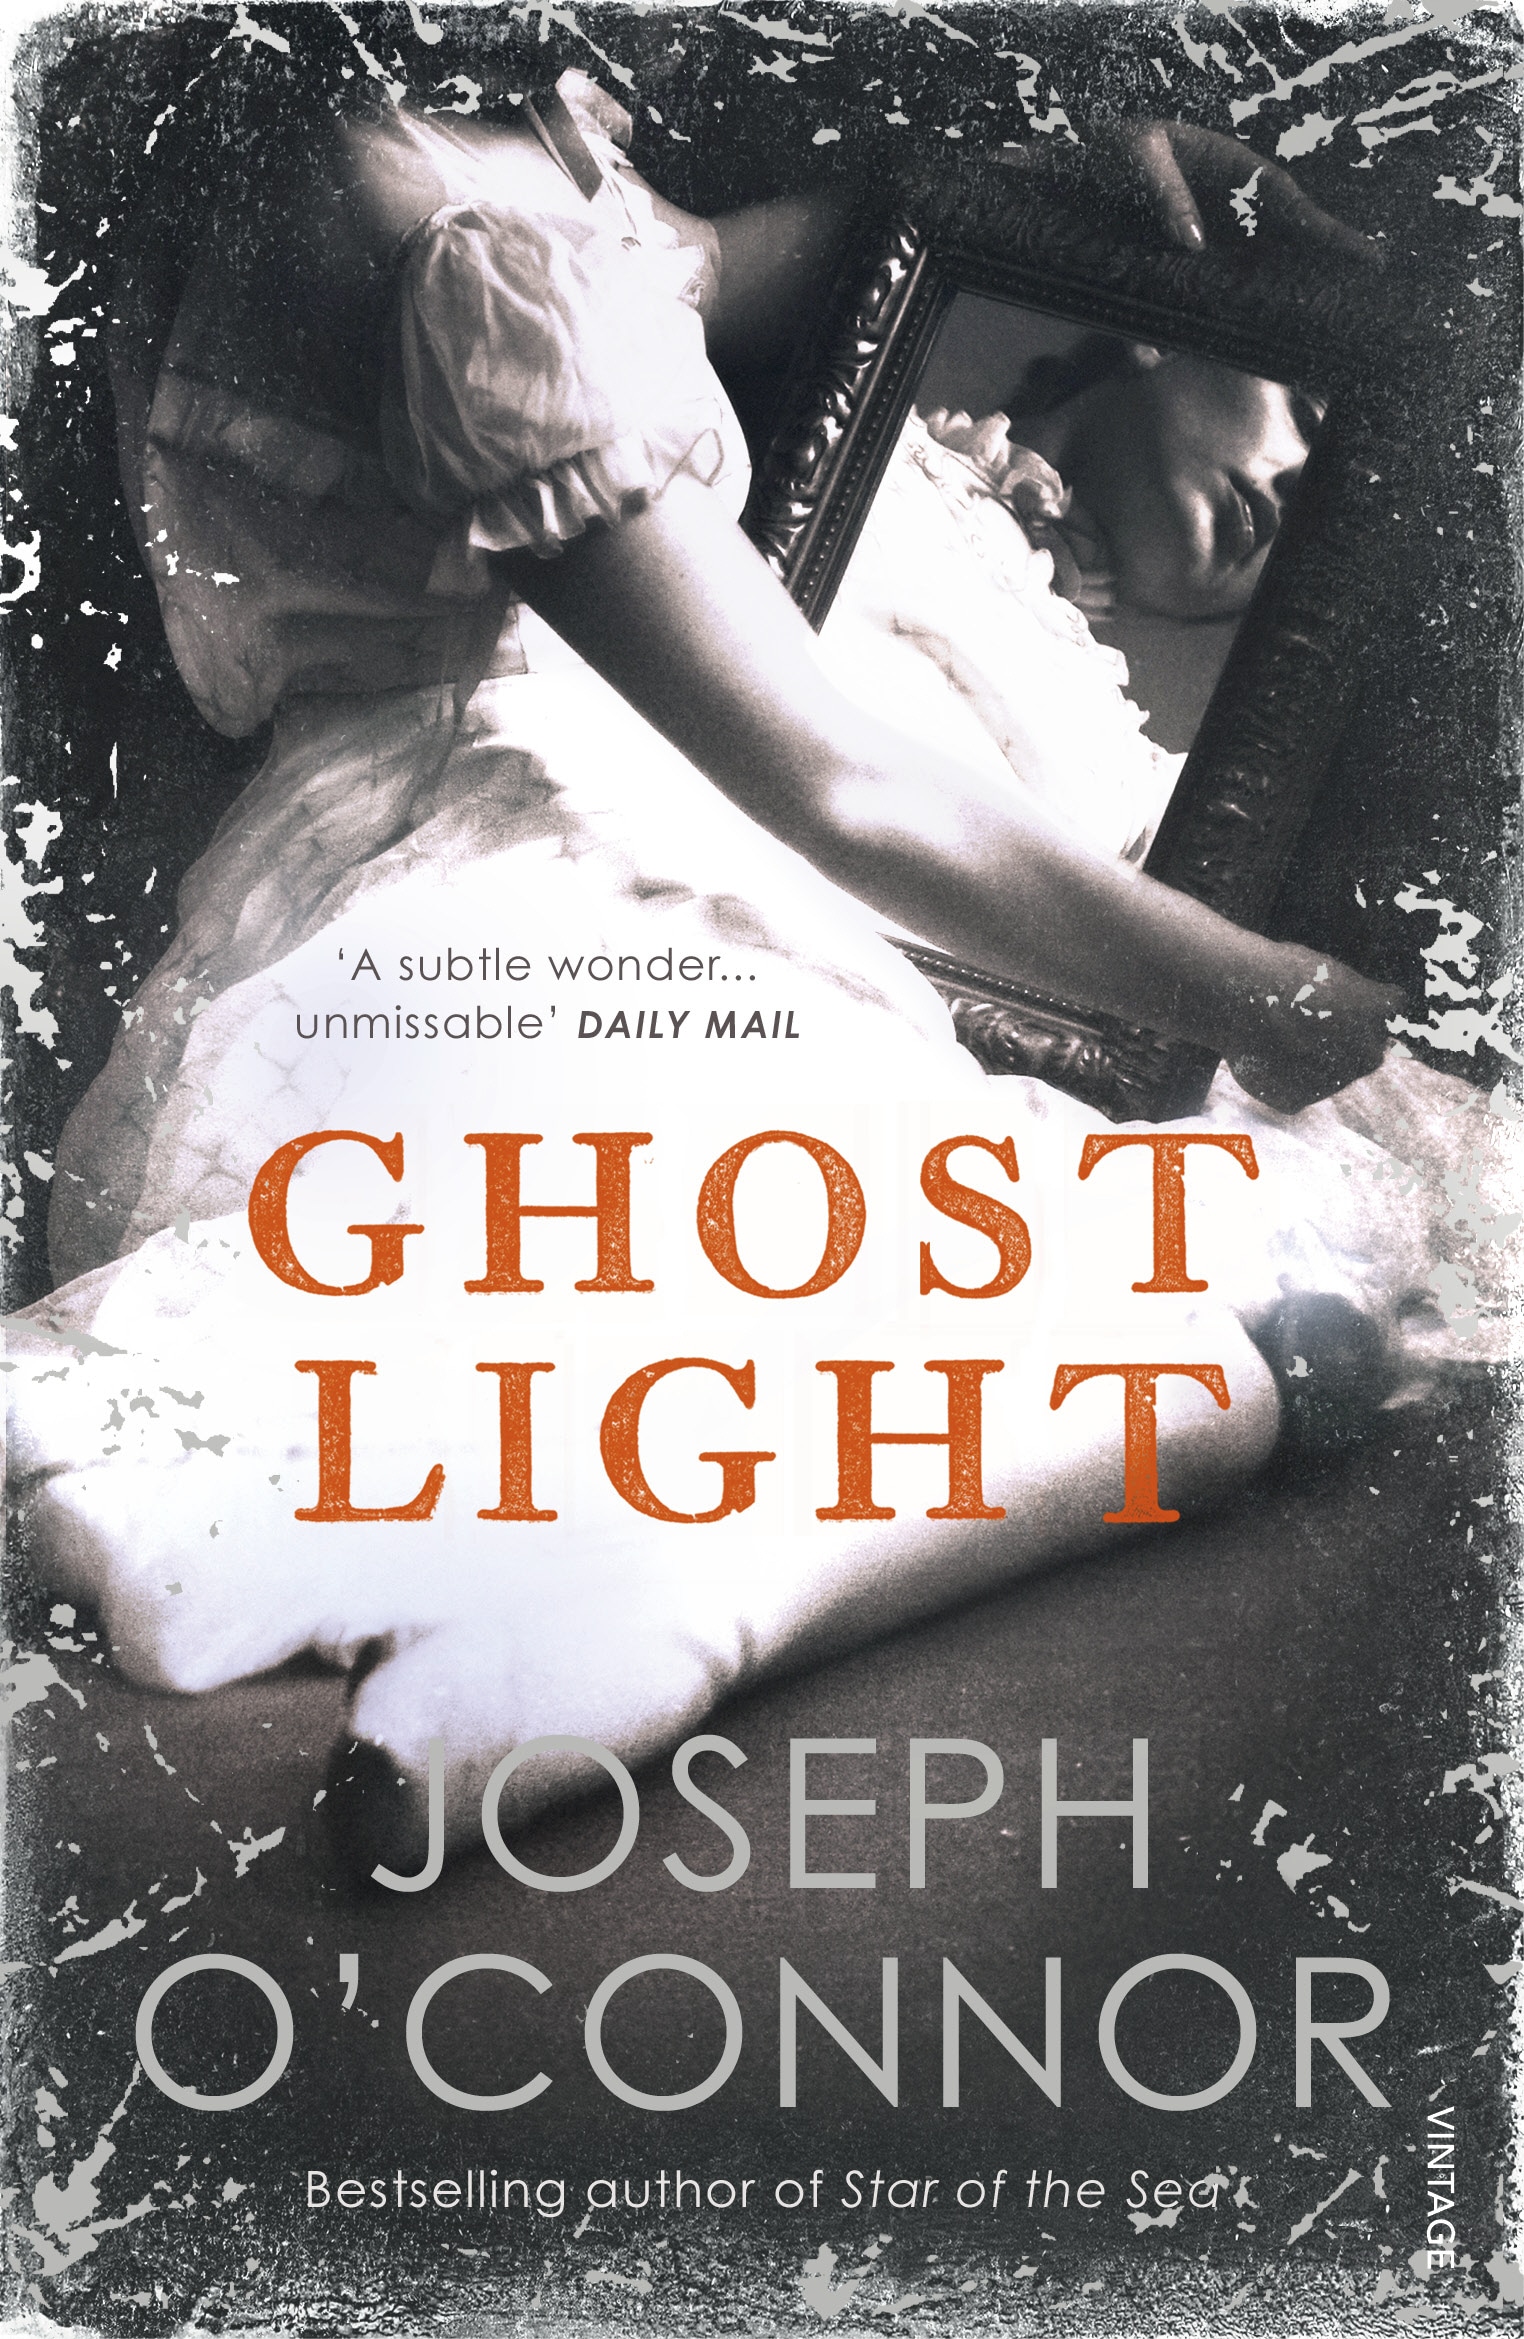 Book “Ghost Light” by Joseph O'Connor — October 3, 2019